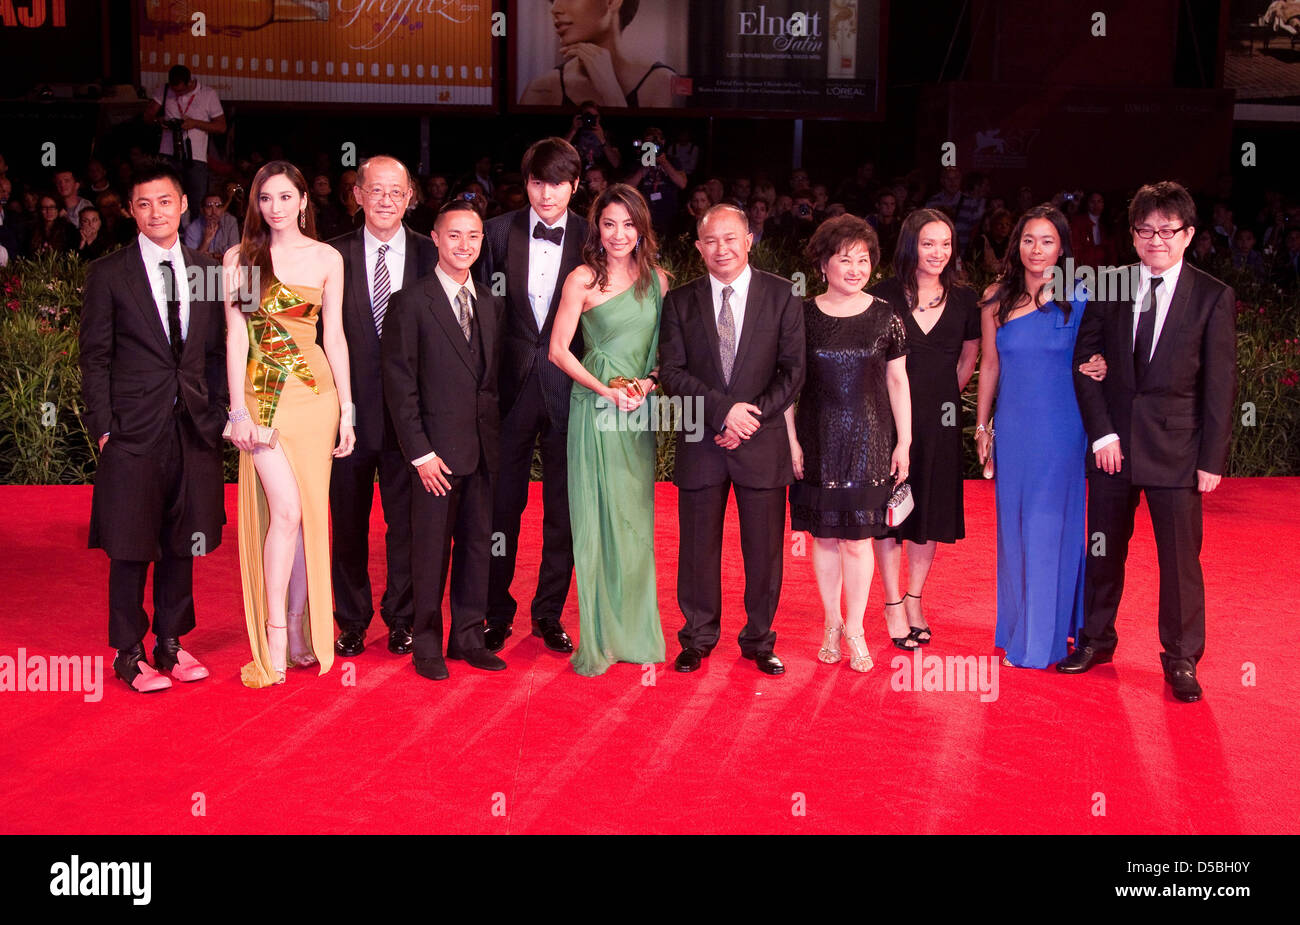 Actor Shawn Yue (L), actress Pace Wu (2nd L) producer Terence Chang (3rd L), actor Jung Woo Sung (5nd L), actress Michelle Yeoh (C left), director John Woo (C right), Annie Woo (4nd R), actress Angeles Woo (2nd R) and director Su Chao Pin (R) attend the premiere of 'Reign Of Assassins' during the 67th Venice International Film Festival in Venice, Italy, 03 September 2010. The film  Stock Photo